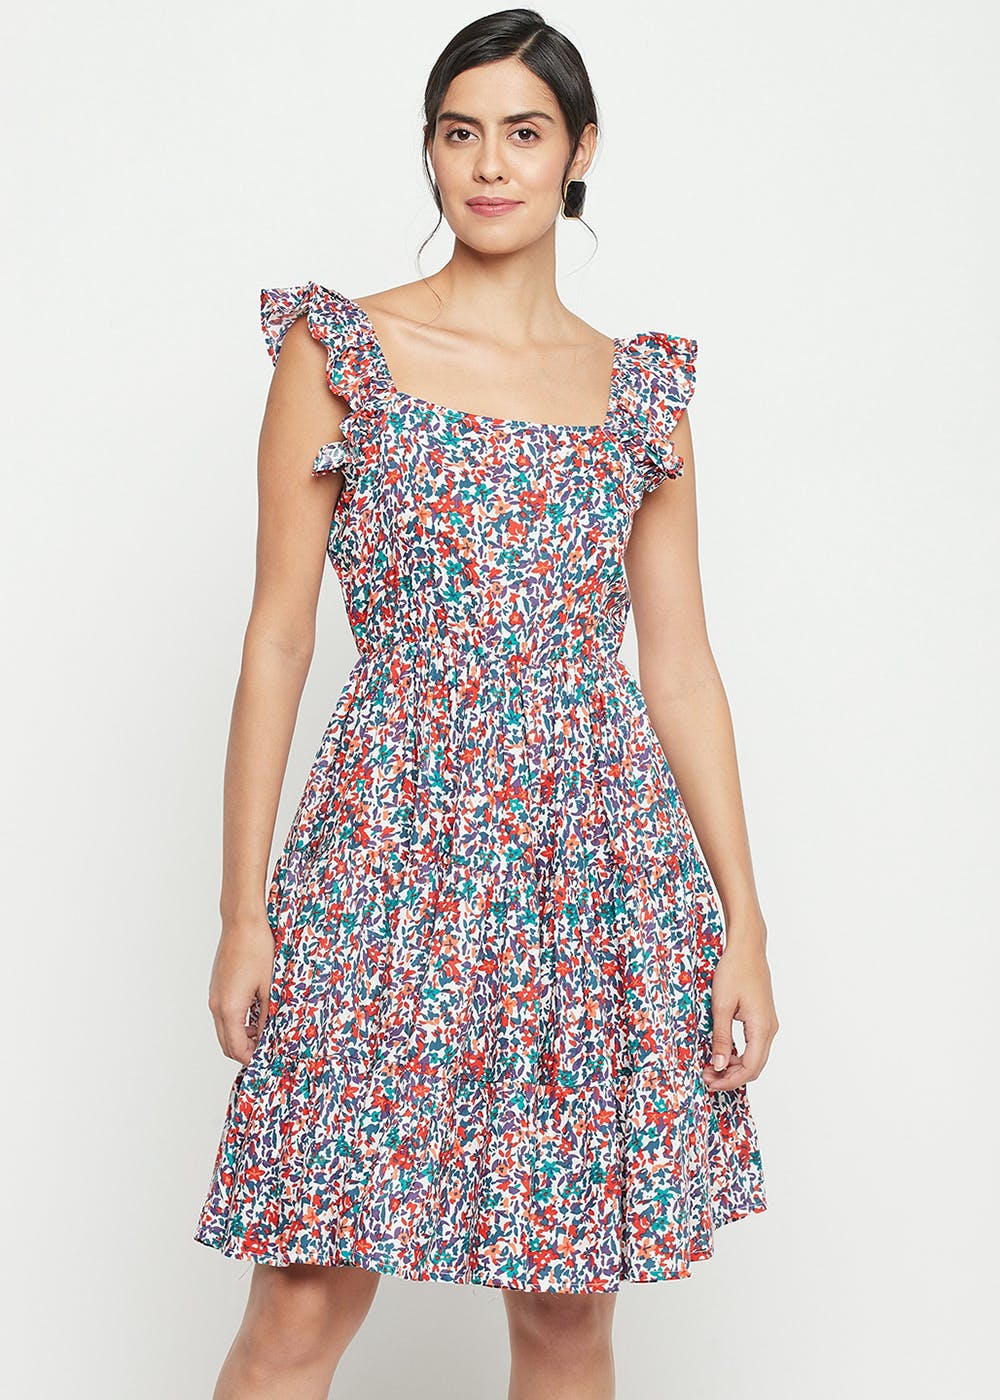 Get Floral Printed Square Neck Tiered Dress at ₹ 1956 | LBB Shop